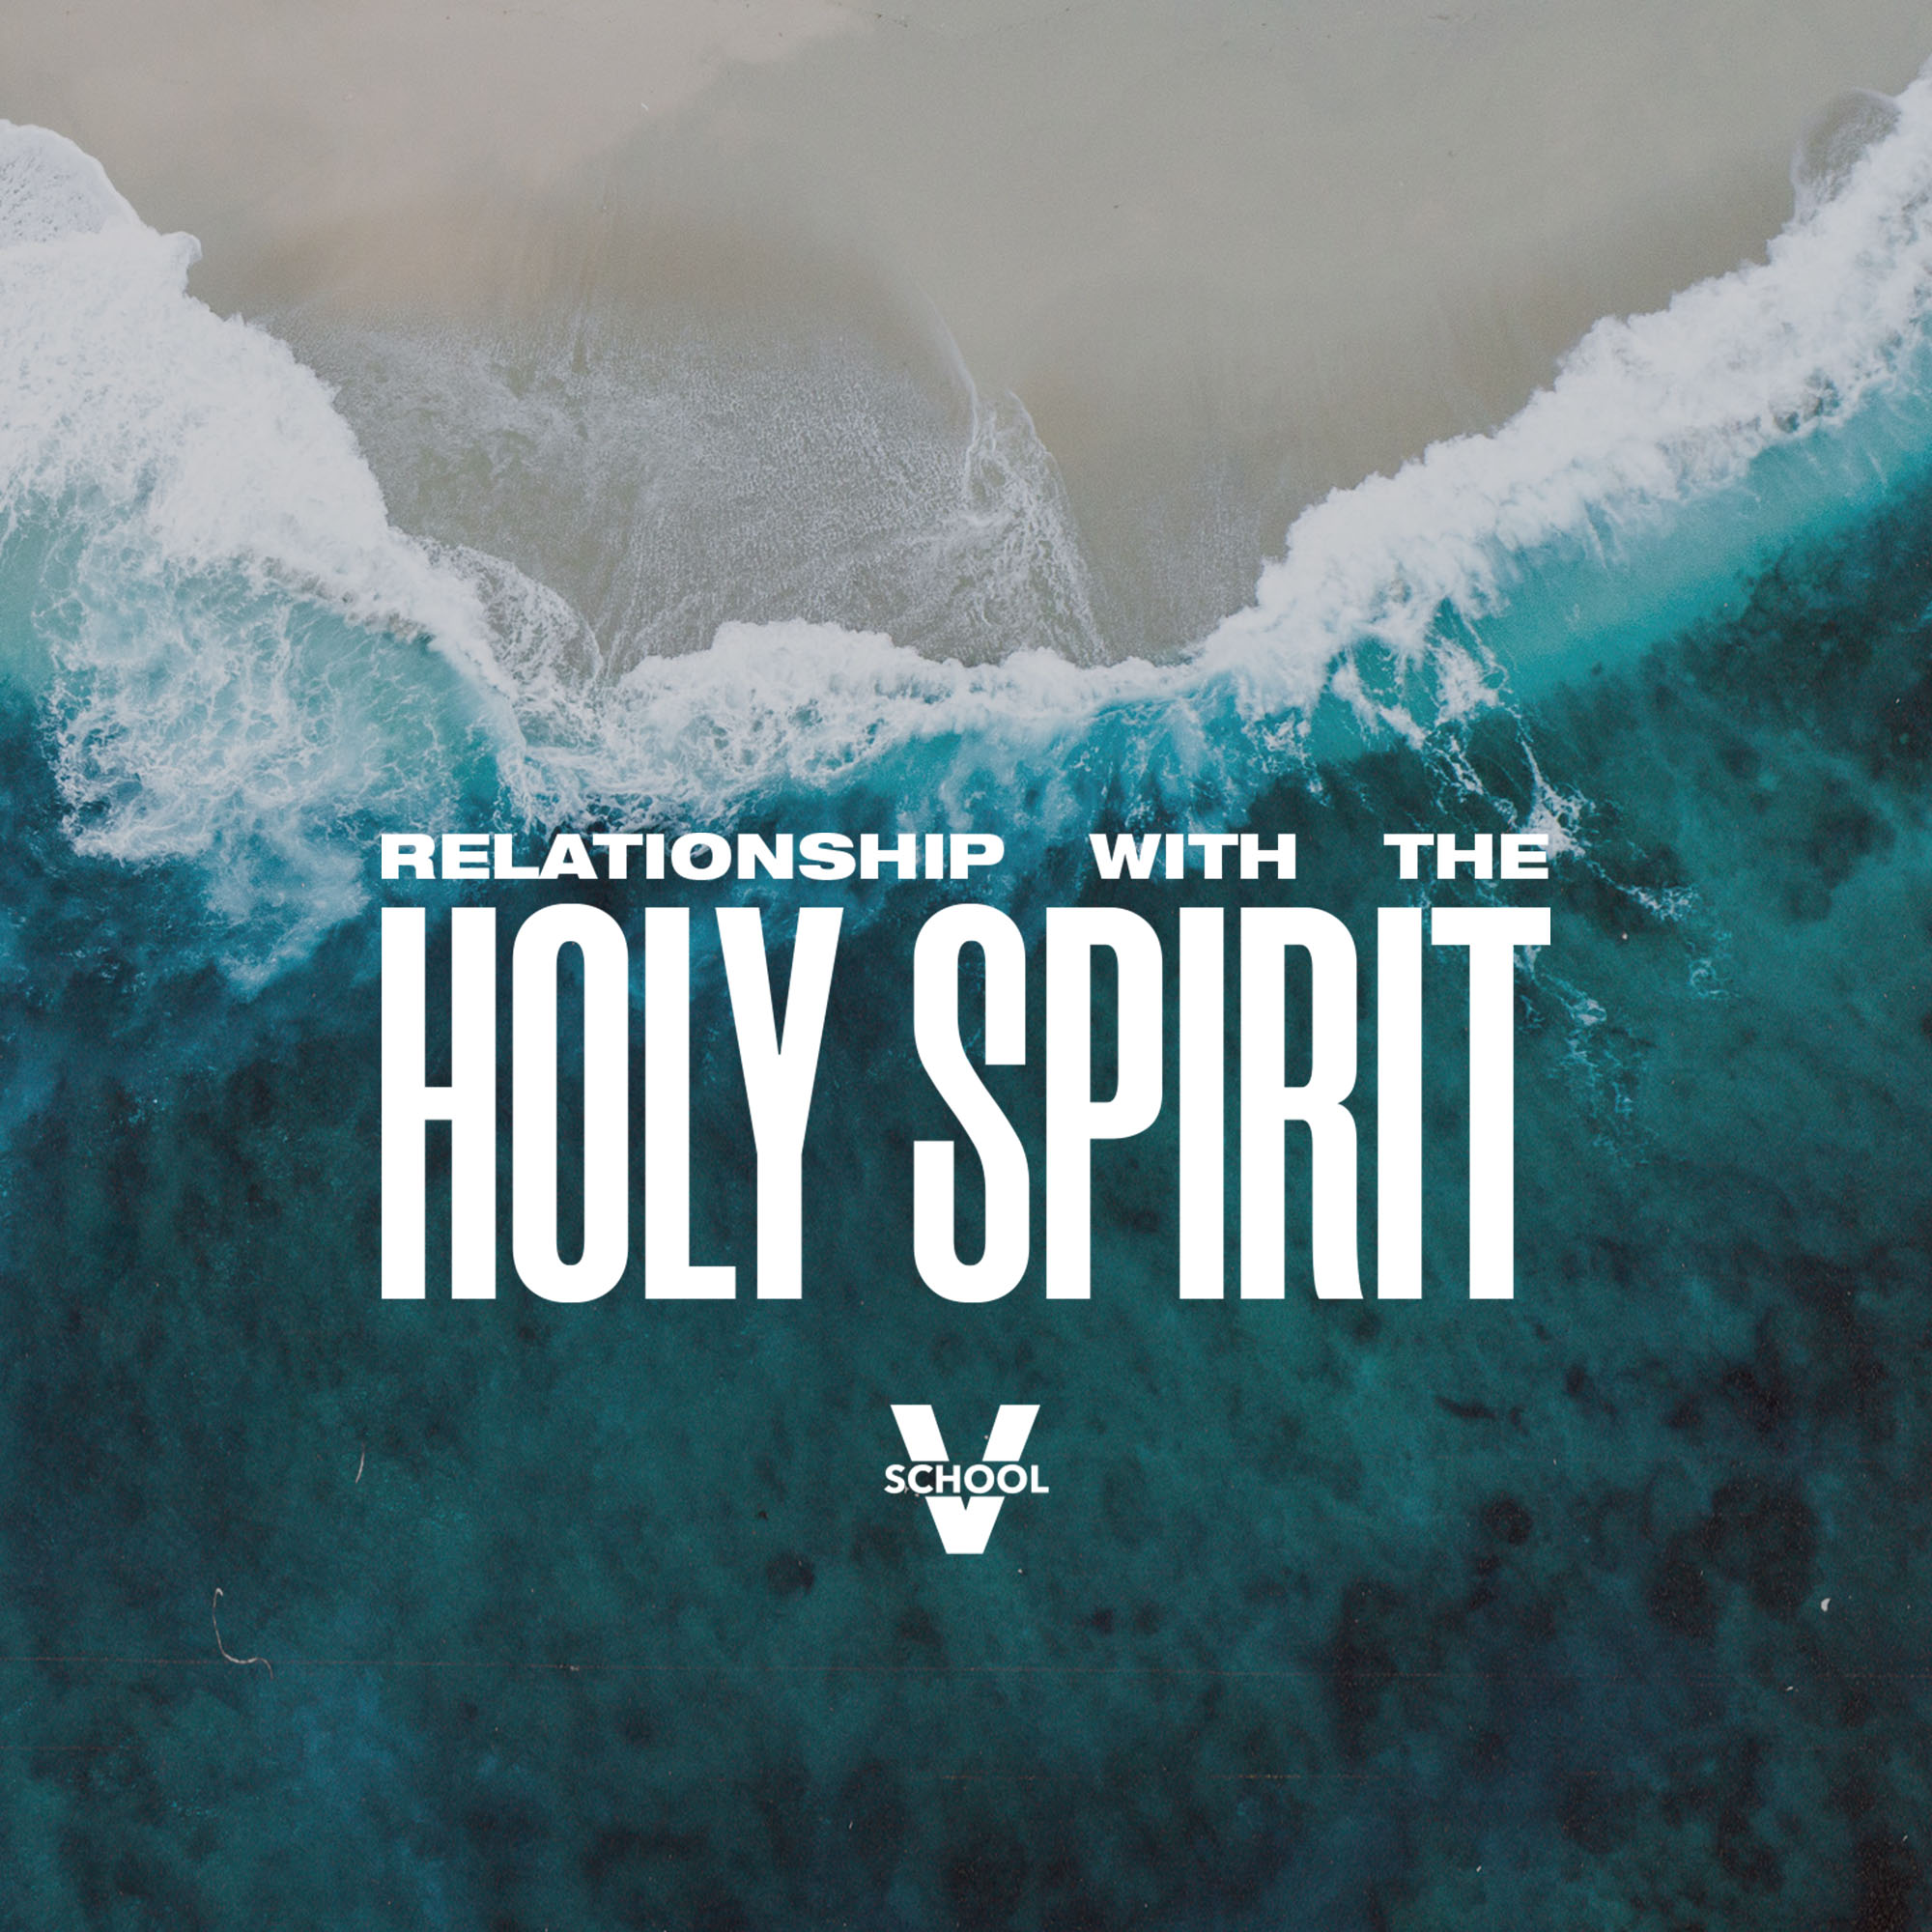 eCourse - Relationship With The Holy Spirit